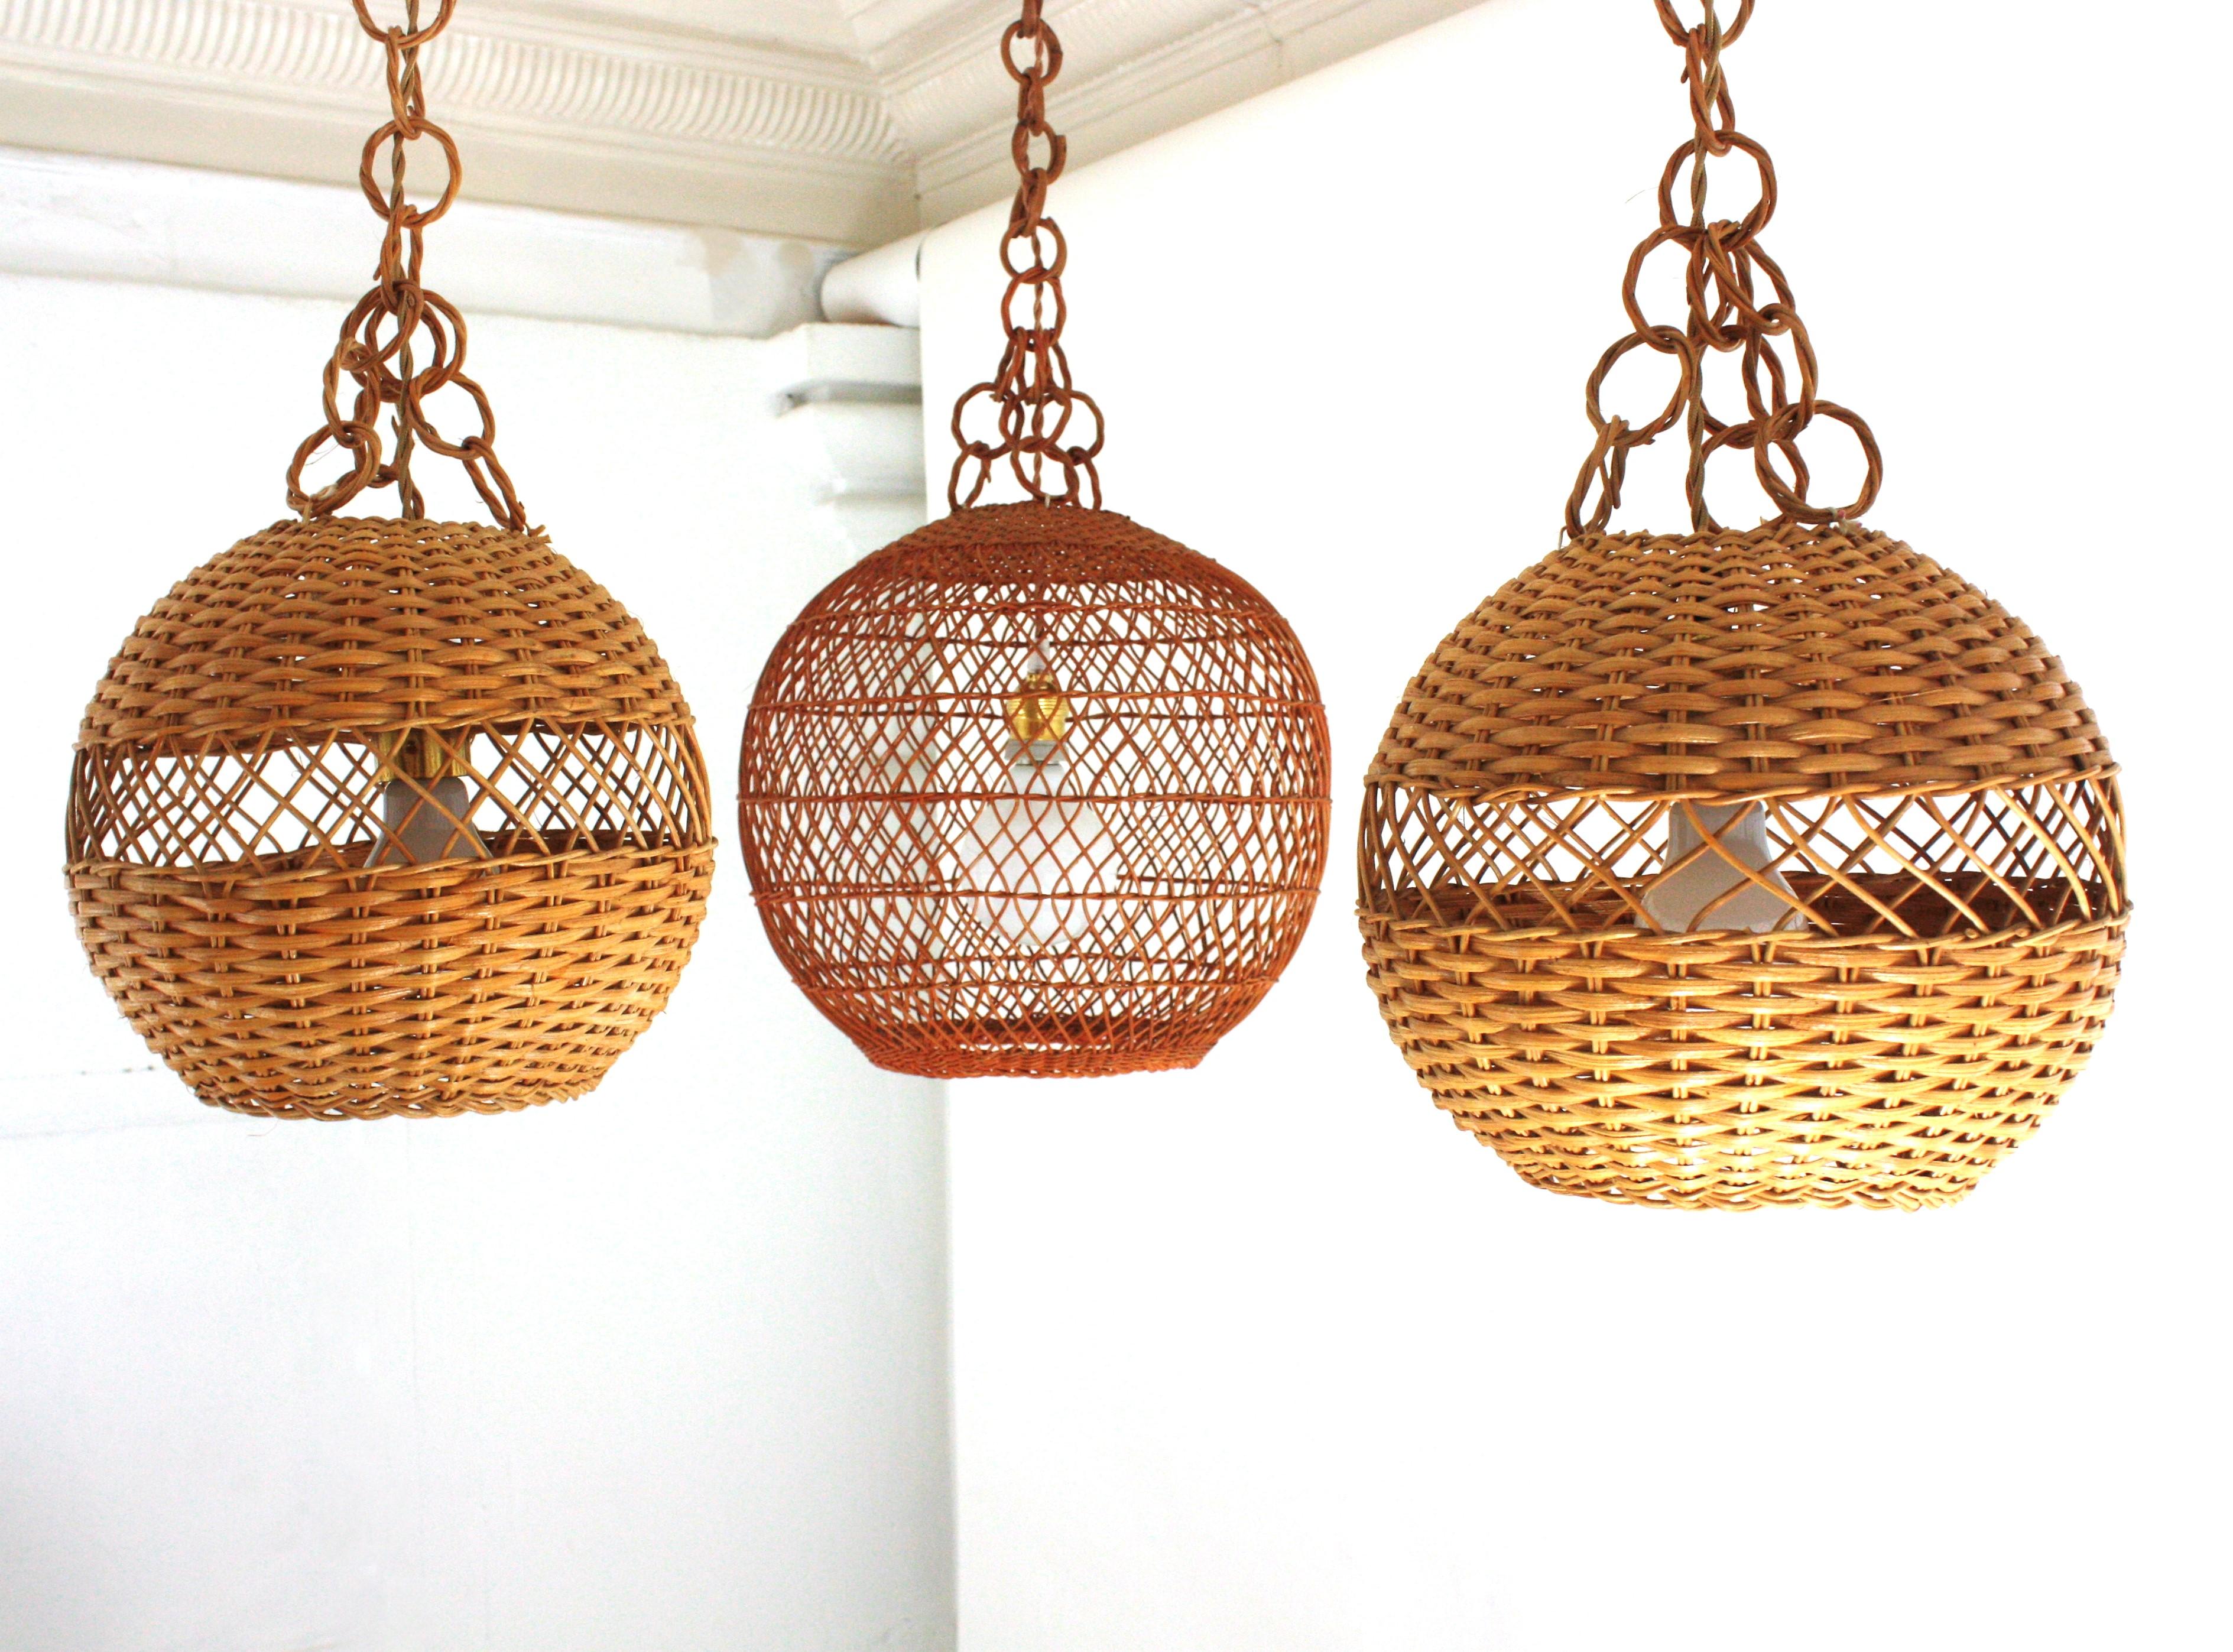 Pair of Handwoven Wicker Globe Pendant Lights or Lanterns For Sale 2